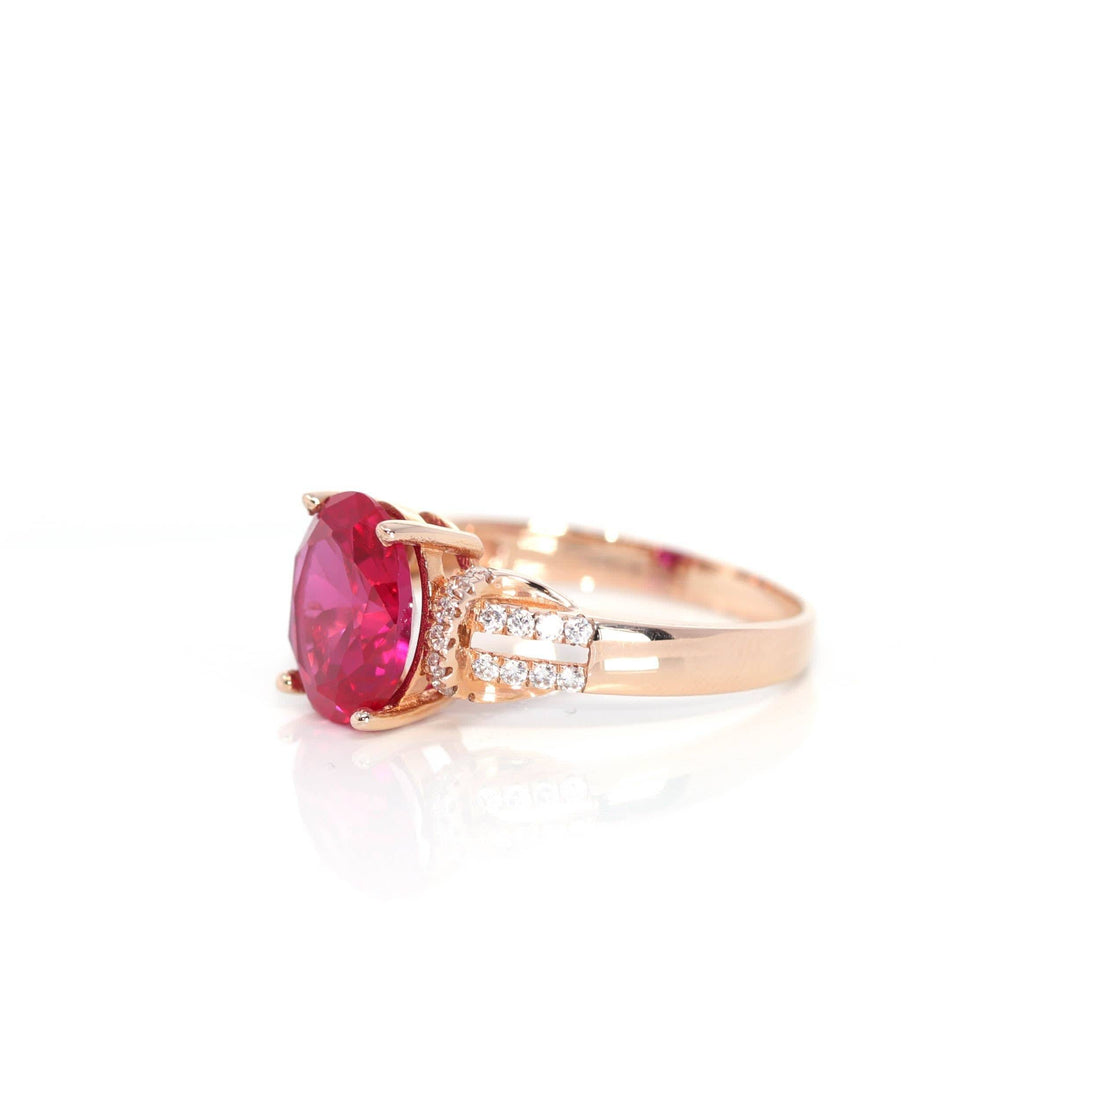 Buy Women's Lab Created Ruby Rings Online For Sale